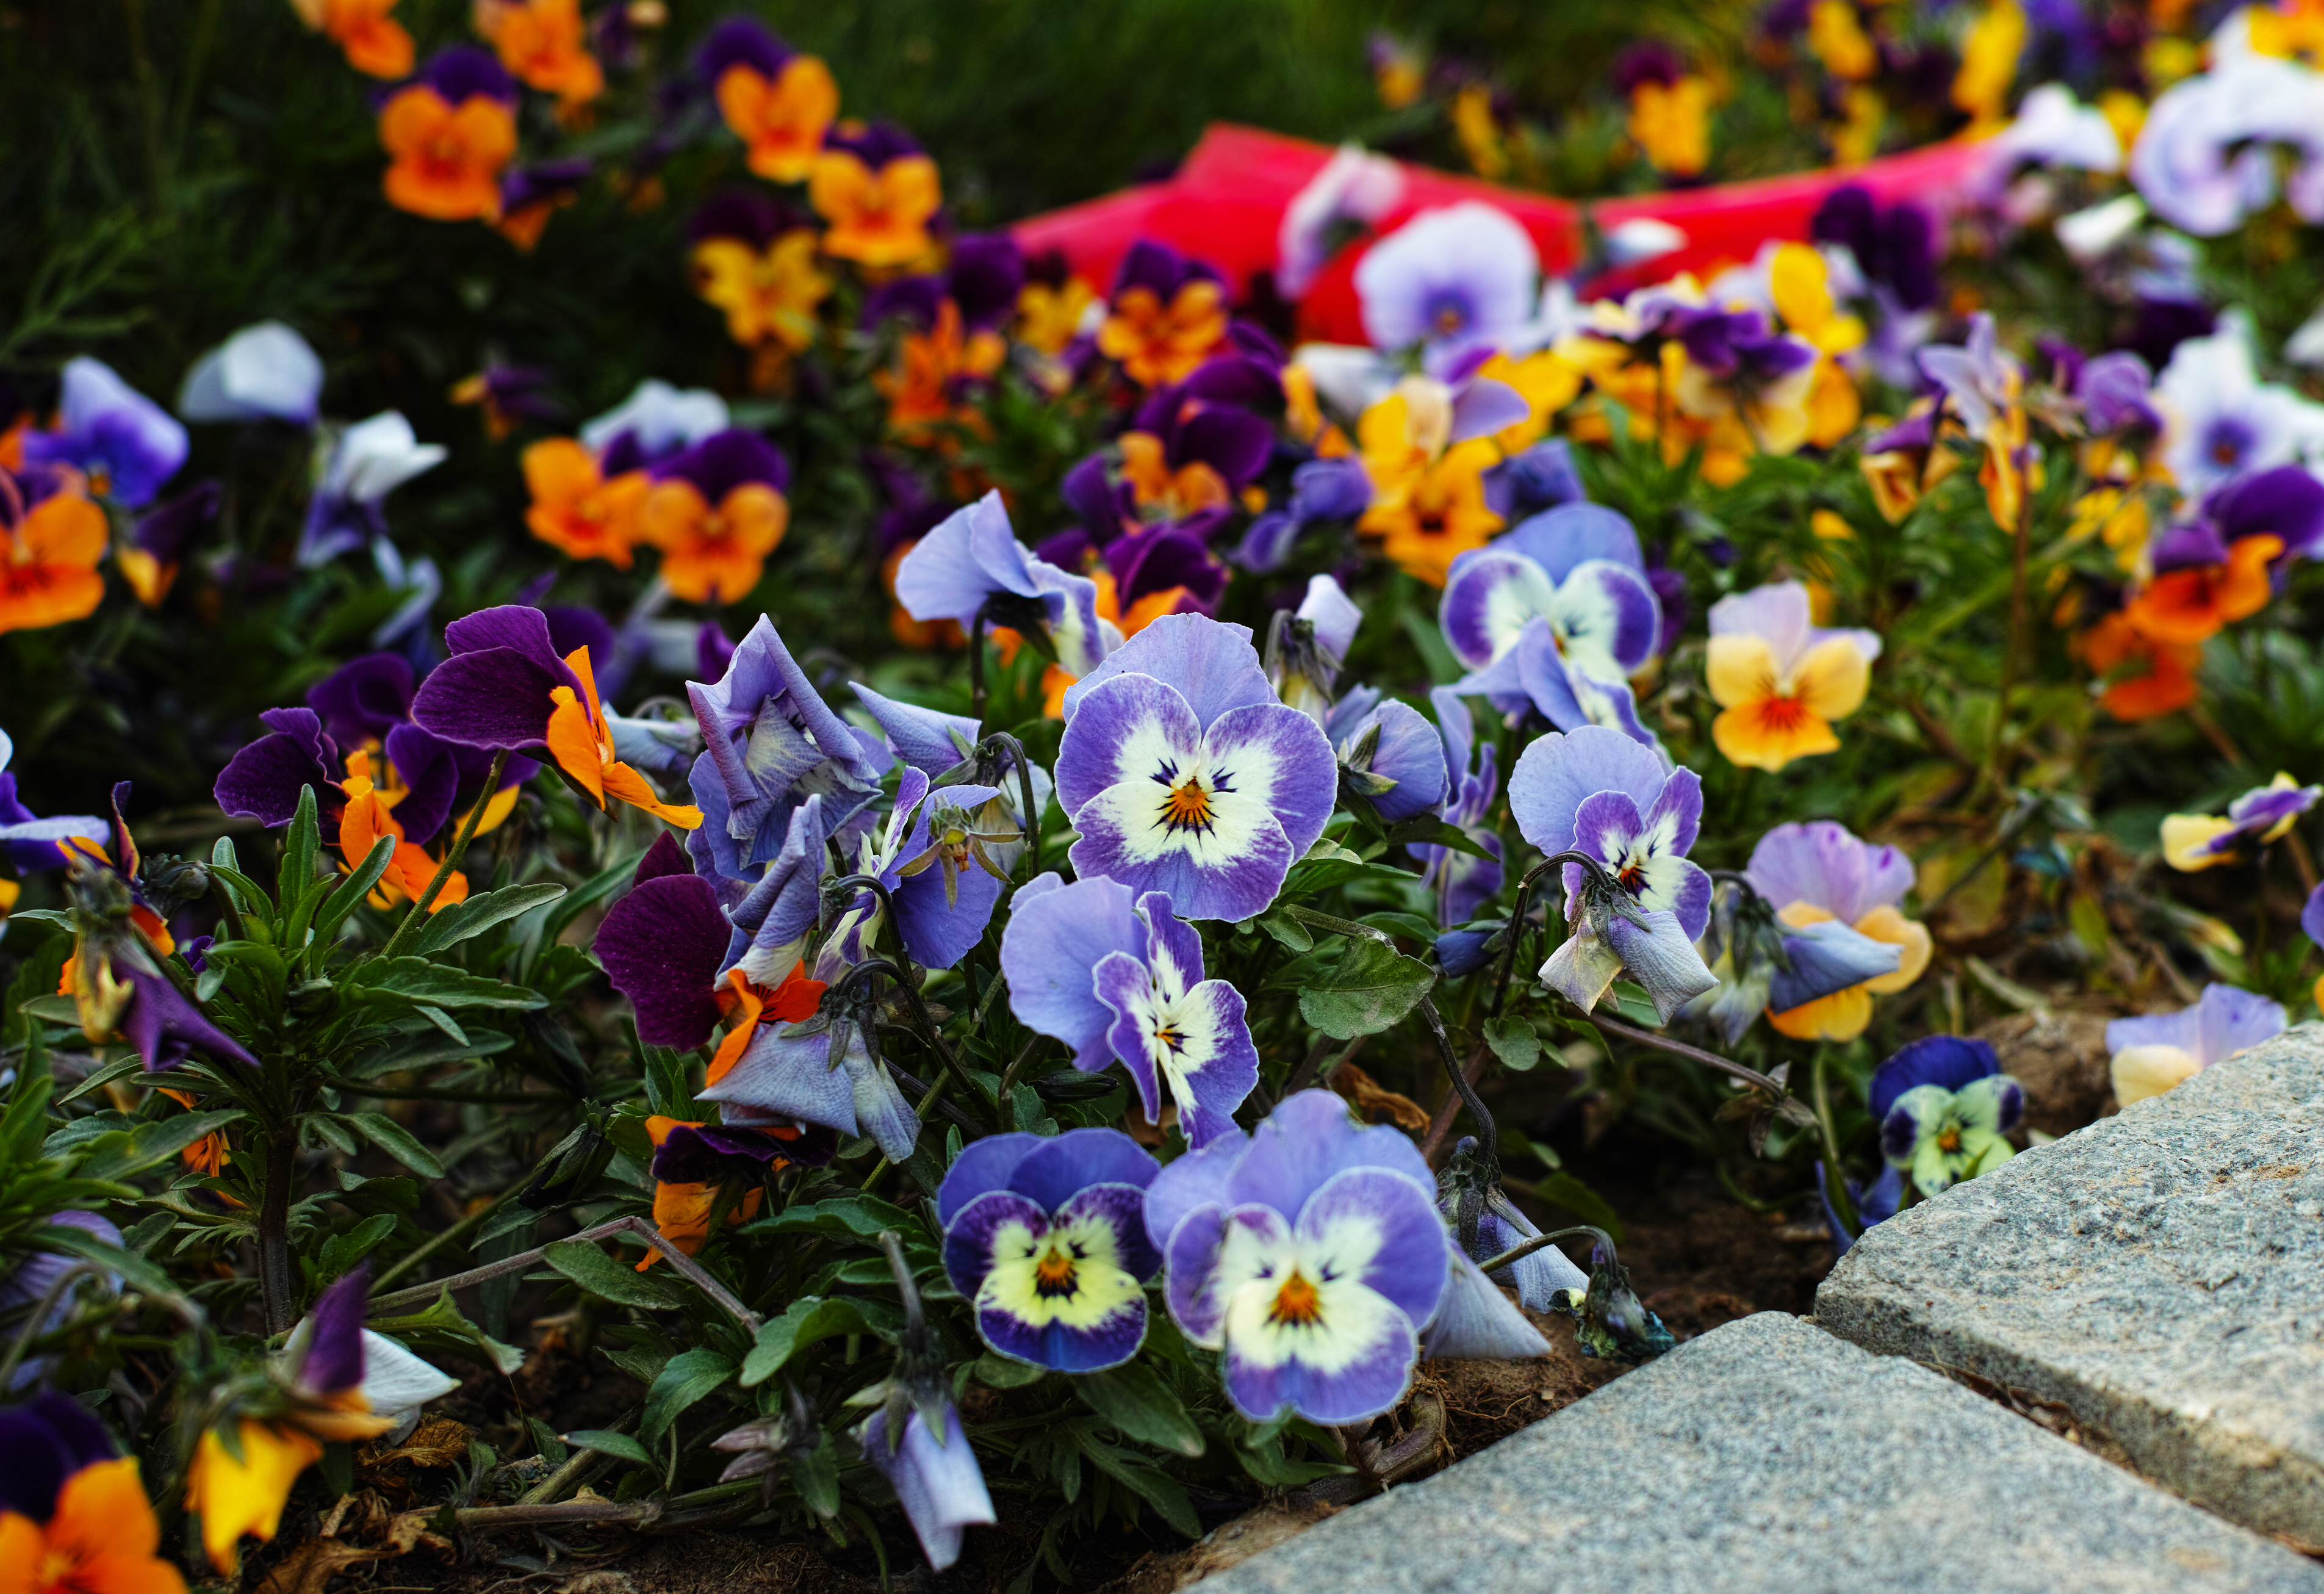 A bed of purple, blue, and orange pansies. - Garden